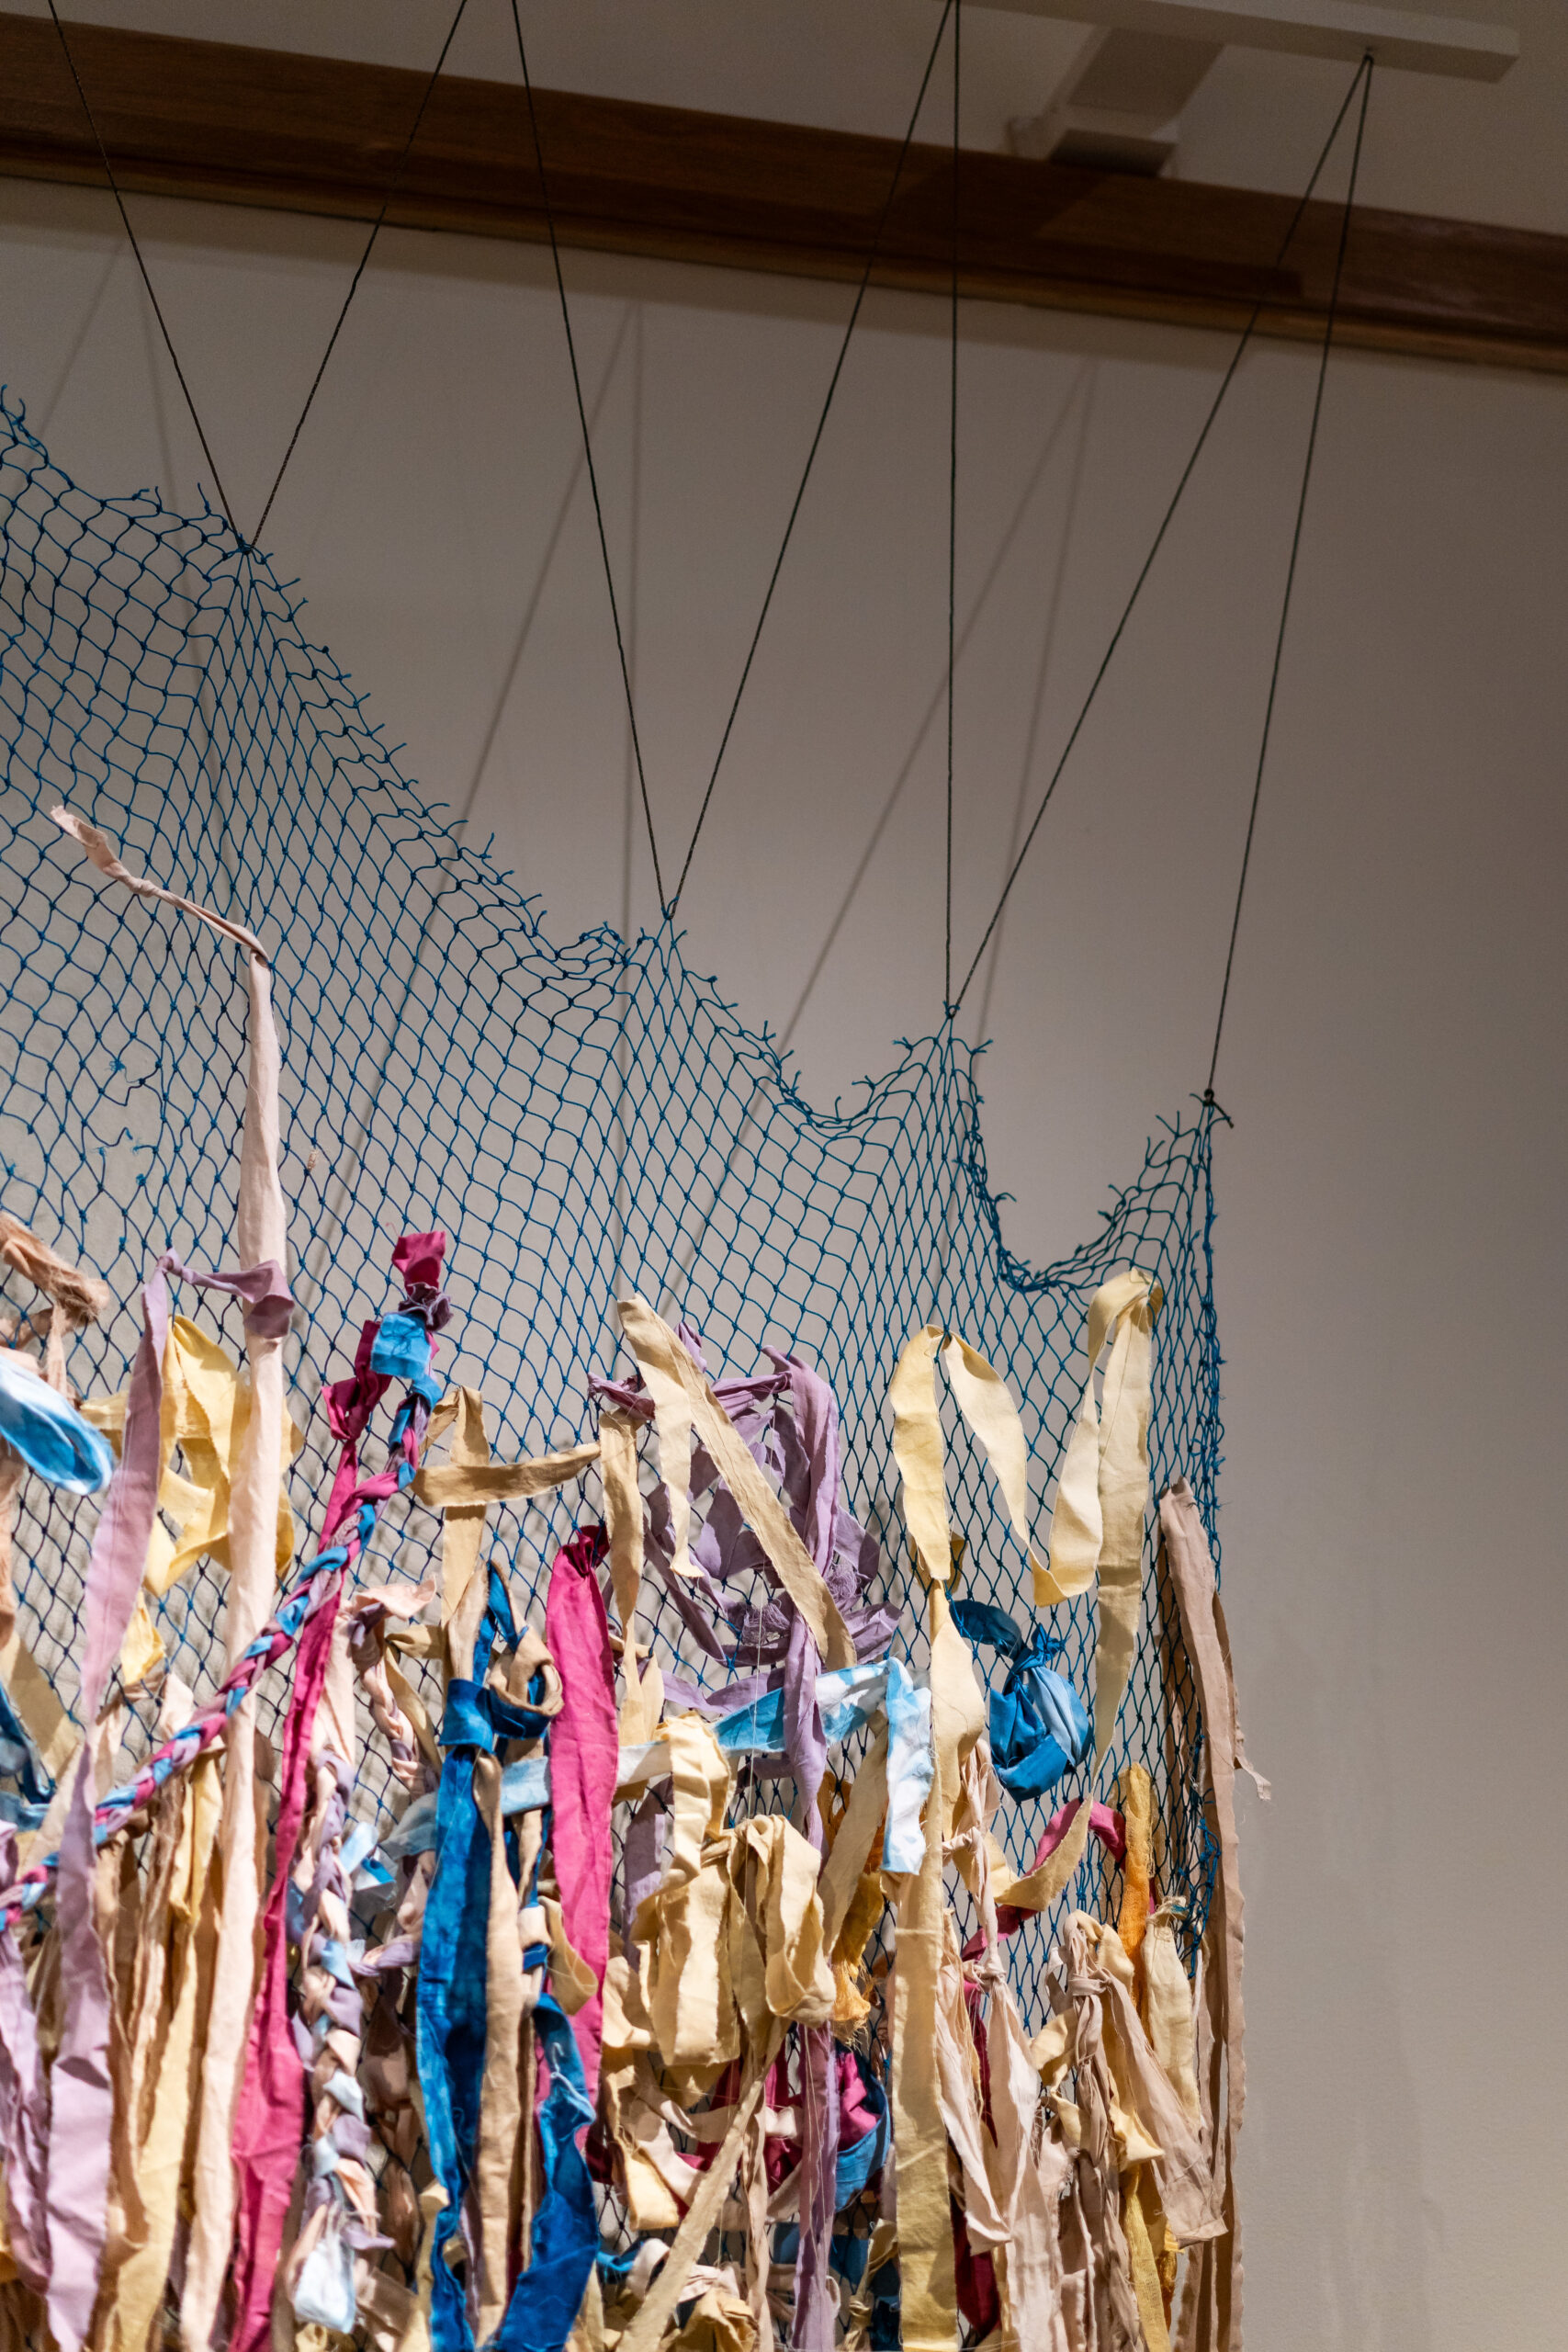 A fiber art piece hung from the ceiling, consisting of fabric strips of various colors tied into a section of blue woven netting.